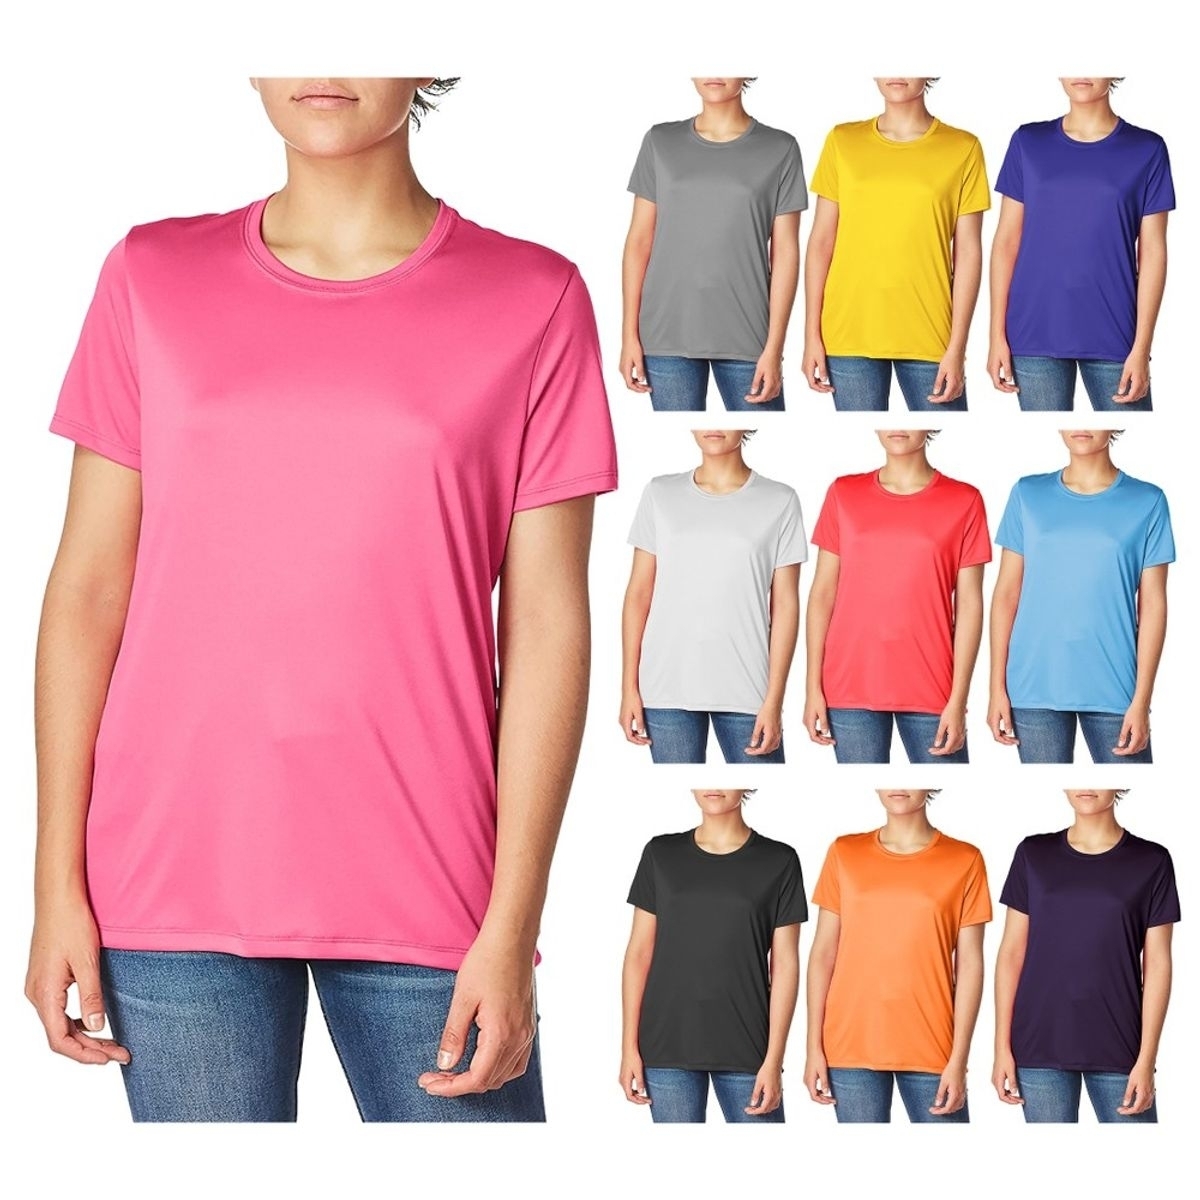 3-Pack: Women's Cool Dri-FIt Moisture Wicking Sim-Fit Long Sleeve Crew Neck T-Shirts - X-large